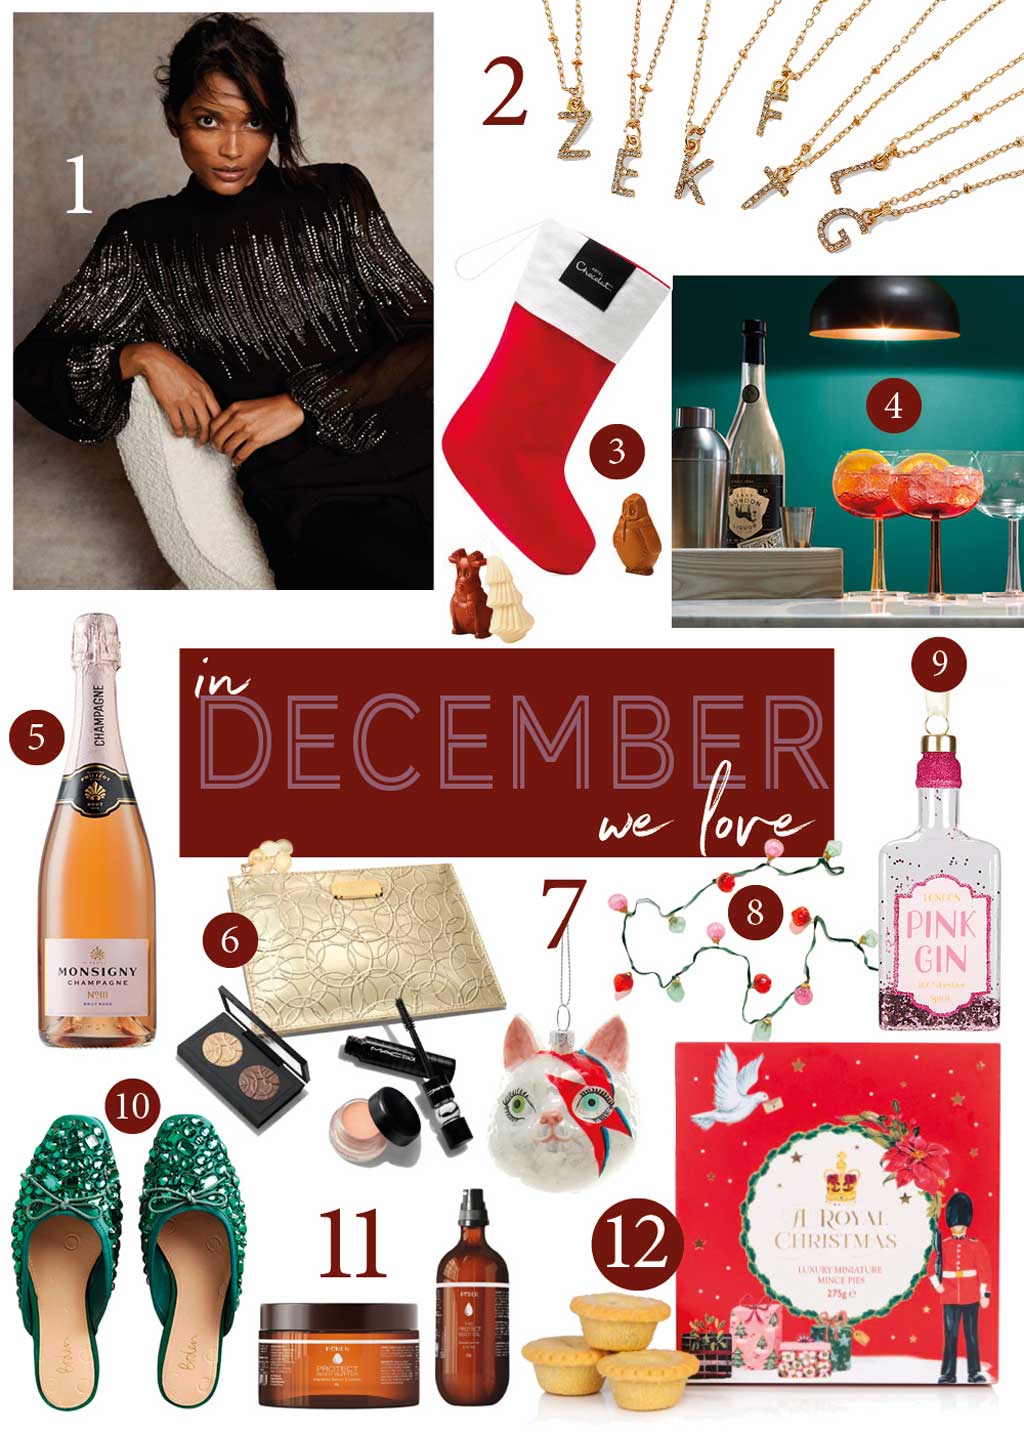 From a pink gin Christmas decoration to festive makeup from Mac. Mince pies to Champagne... here are the things we're loving in December! 